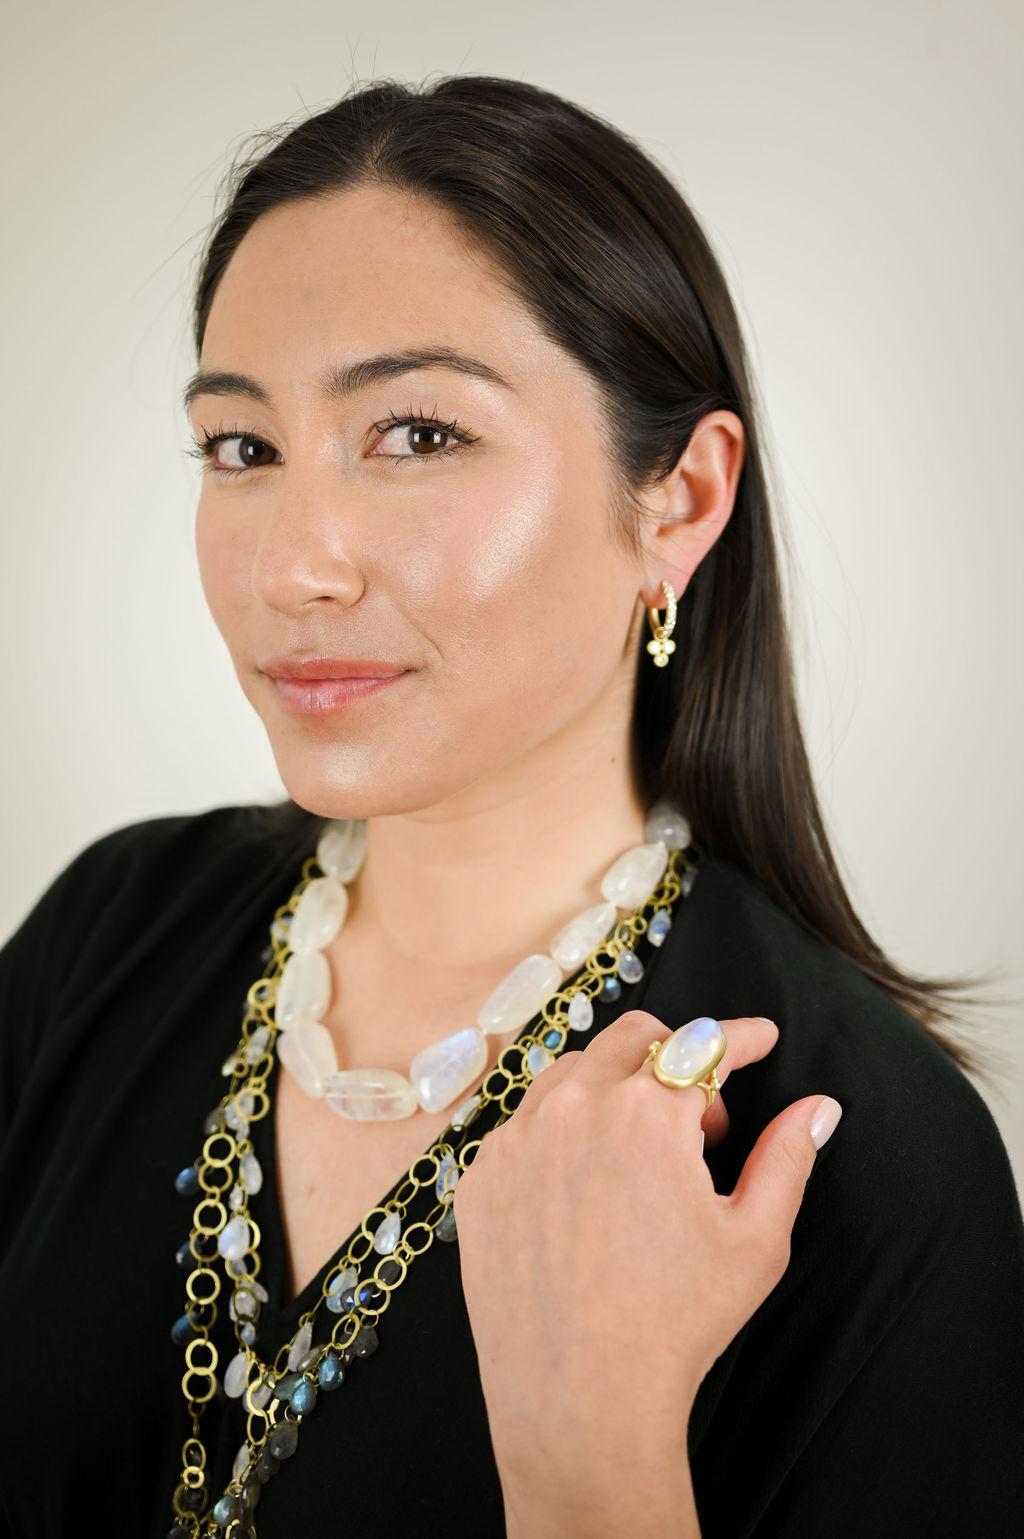 Faye Kim's modern yet timeless 18 Karat Gold Micro Pave Medium Hinged Hoop Earrings will complement any style and wardrobe, adding sparkle to every occasion! 

Other photos show Micro Pave Hinged Hoops with Triple Diamond Drops, sold